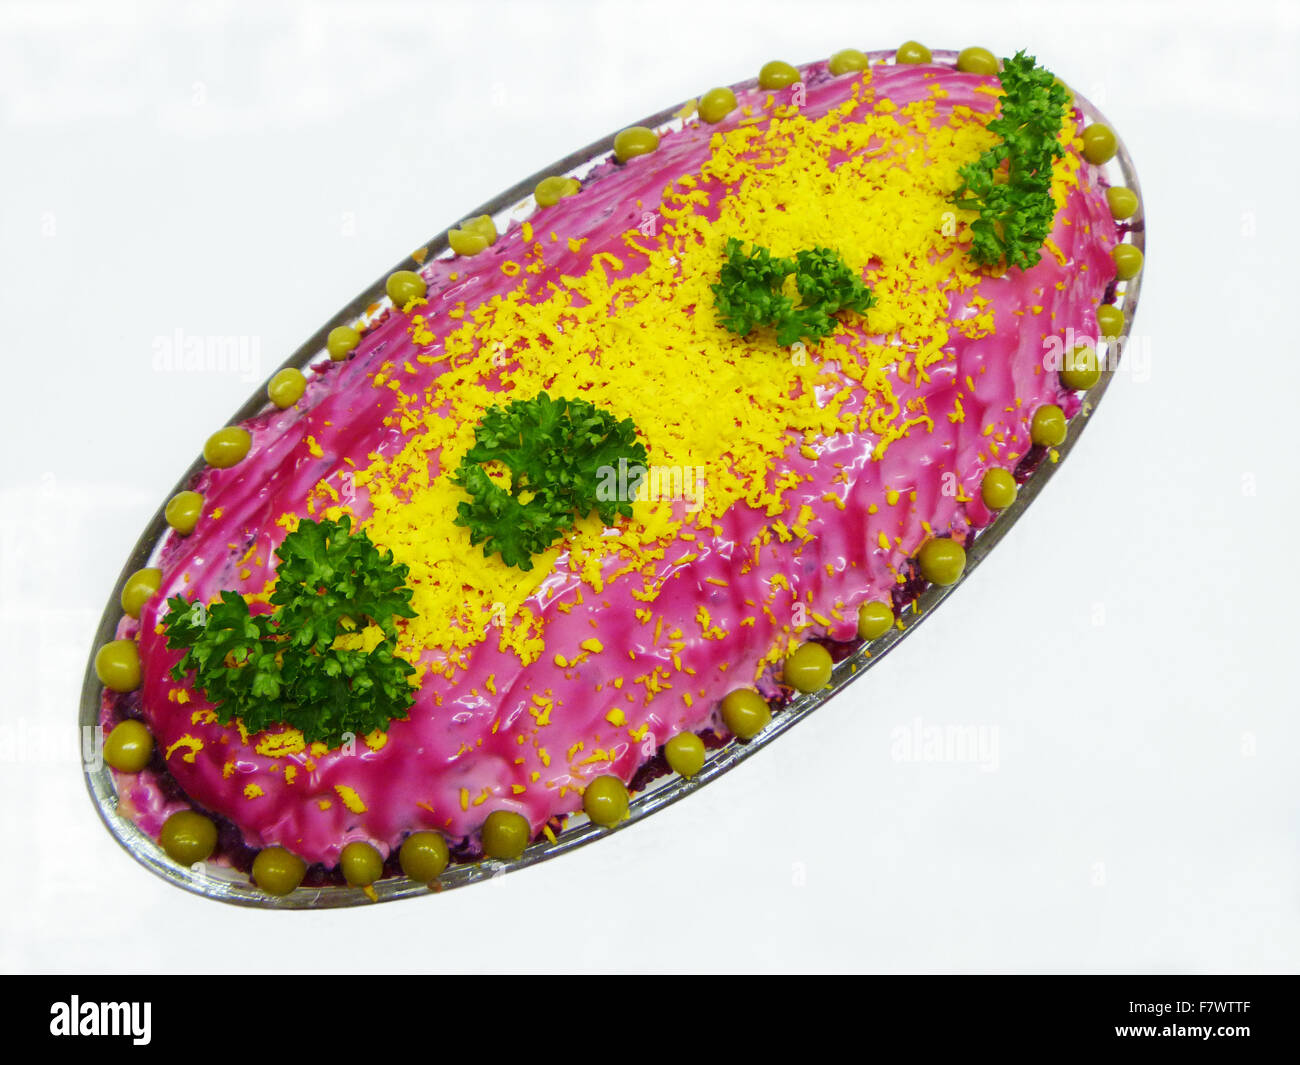 Salad on plate is insulated on light background Stock Photo